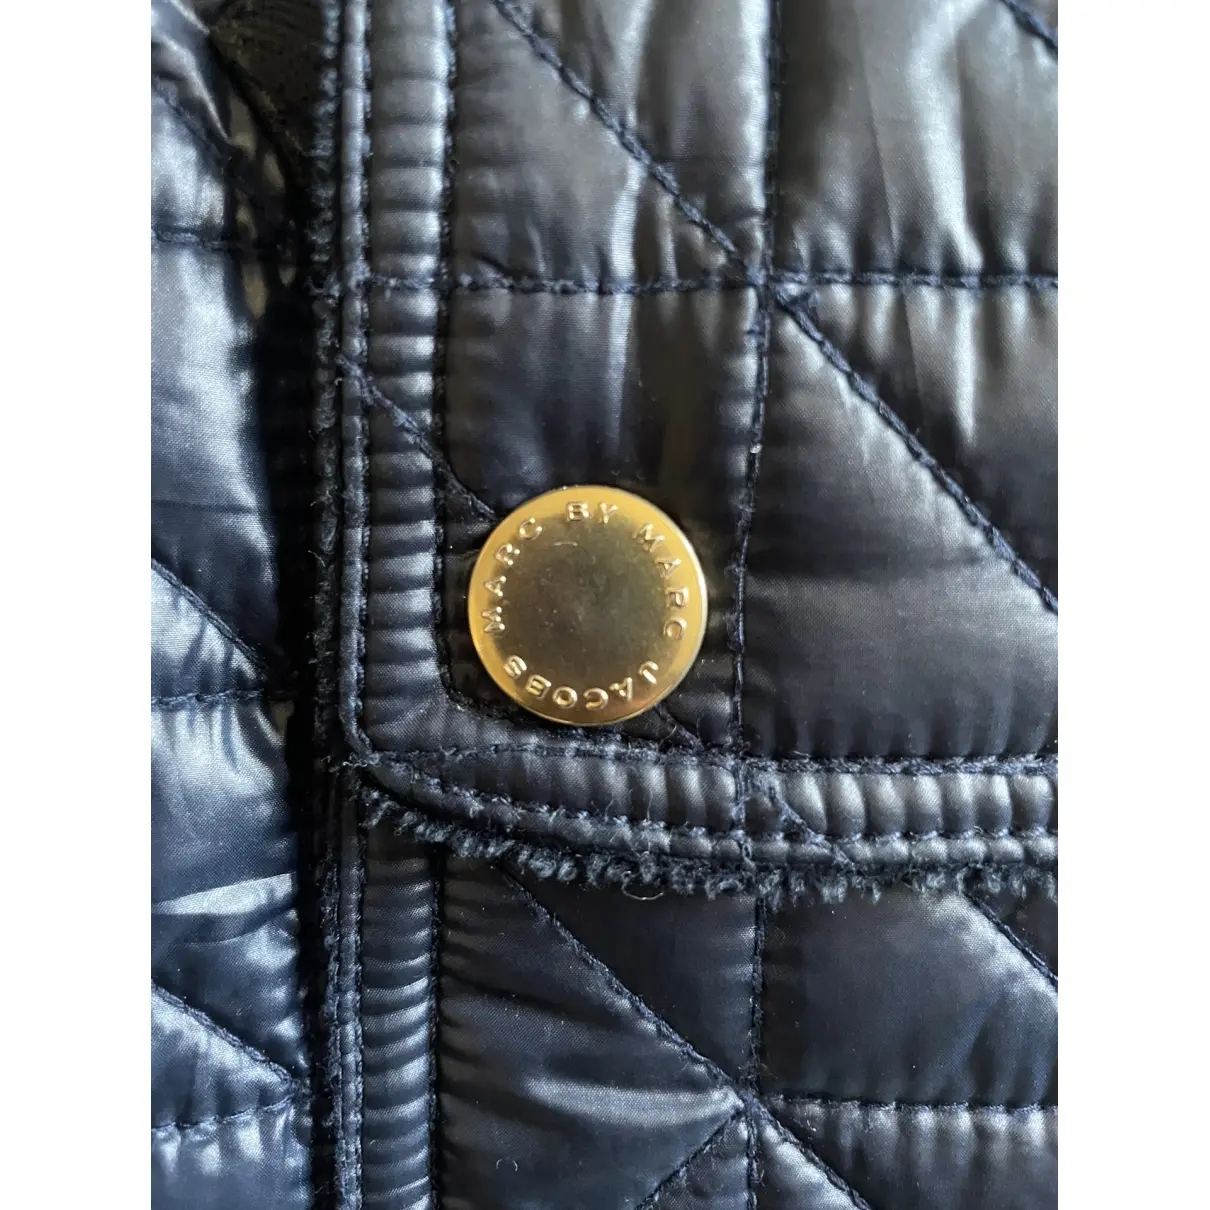 Coat Marc by Marc Jacobs